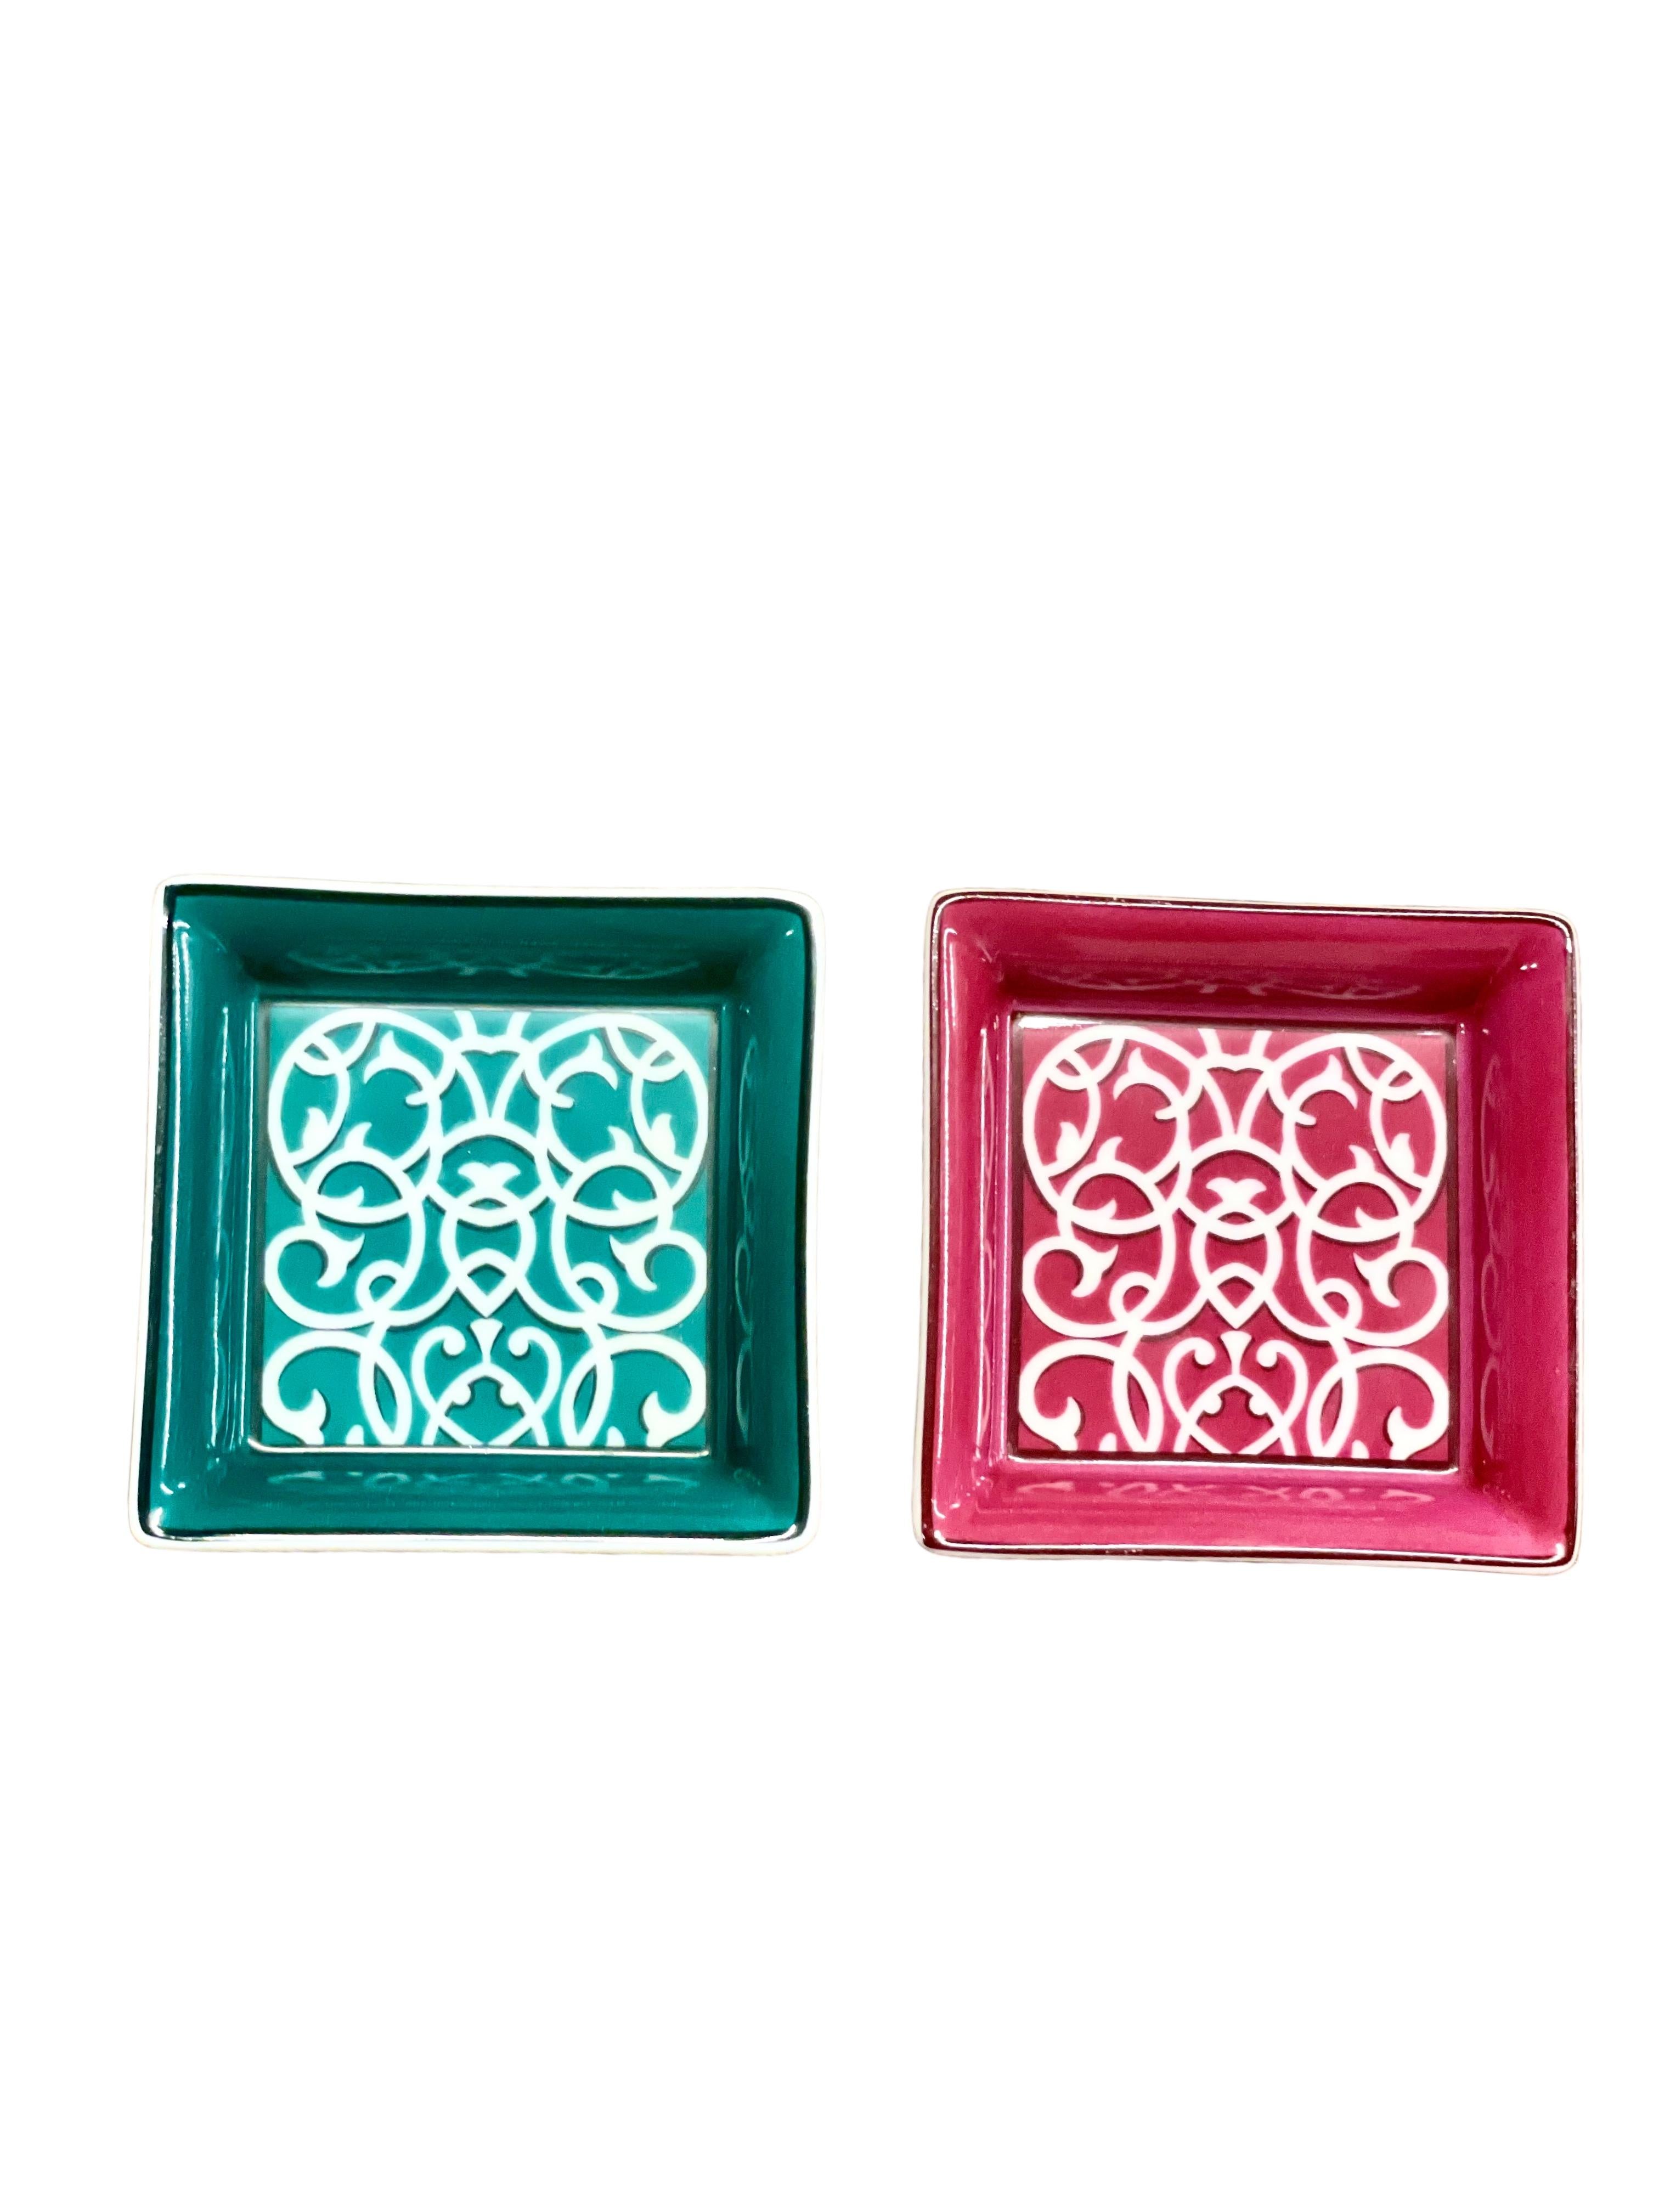 A striking pair of Hermès porcelain trinket or cufflink trays, one pink and one green, with intricate geometric detailing on each, and matching velvet color on each of the bottom trinket. 